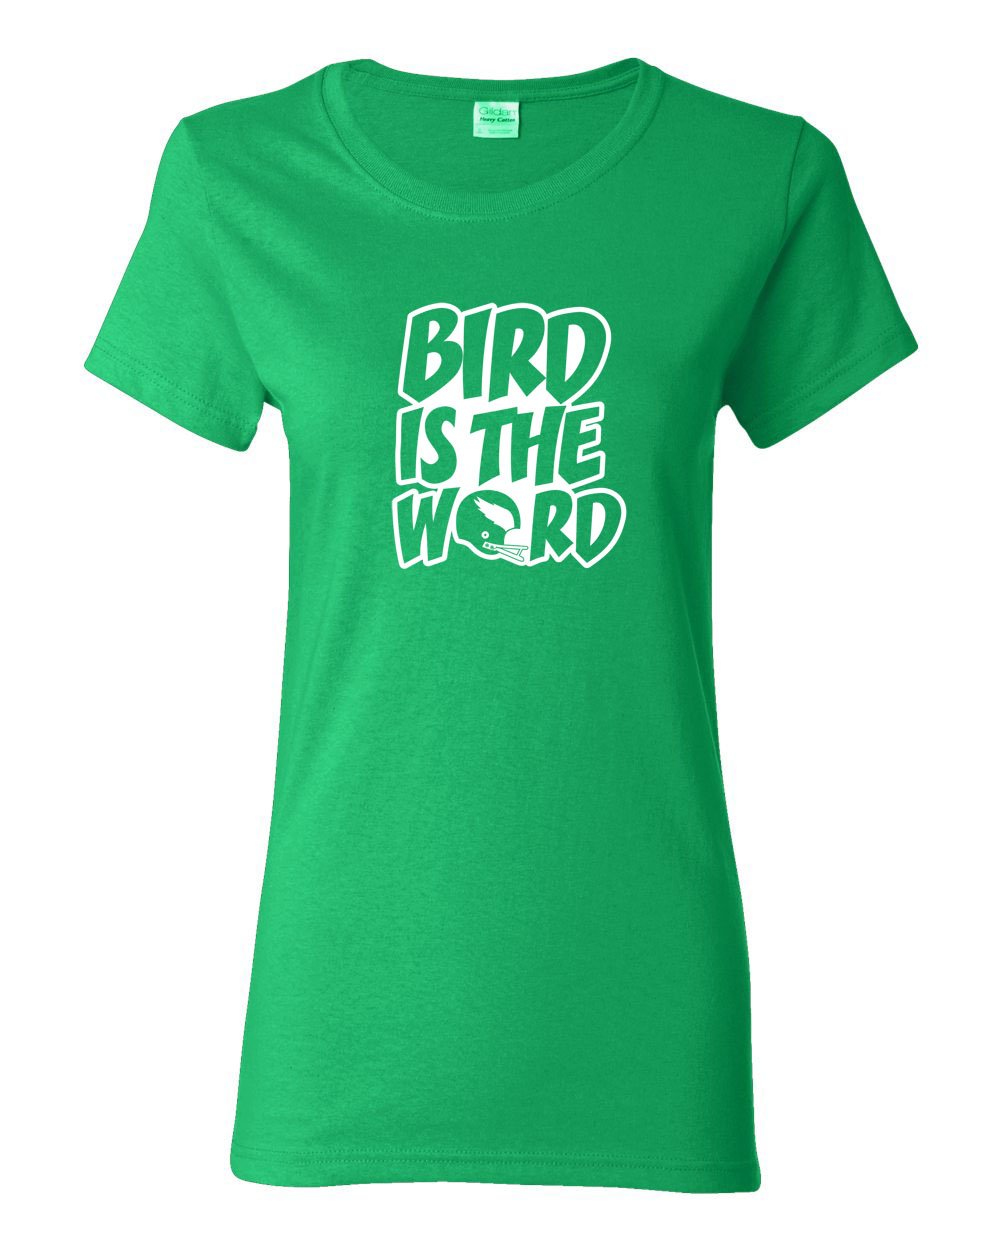 Bird is the Word LADIES Missy-Fit T-Shirt